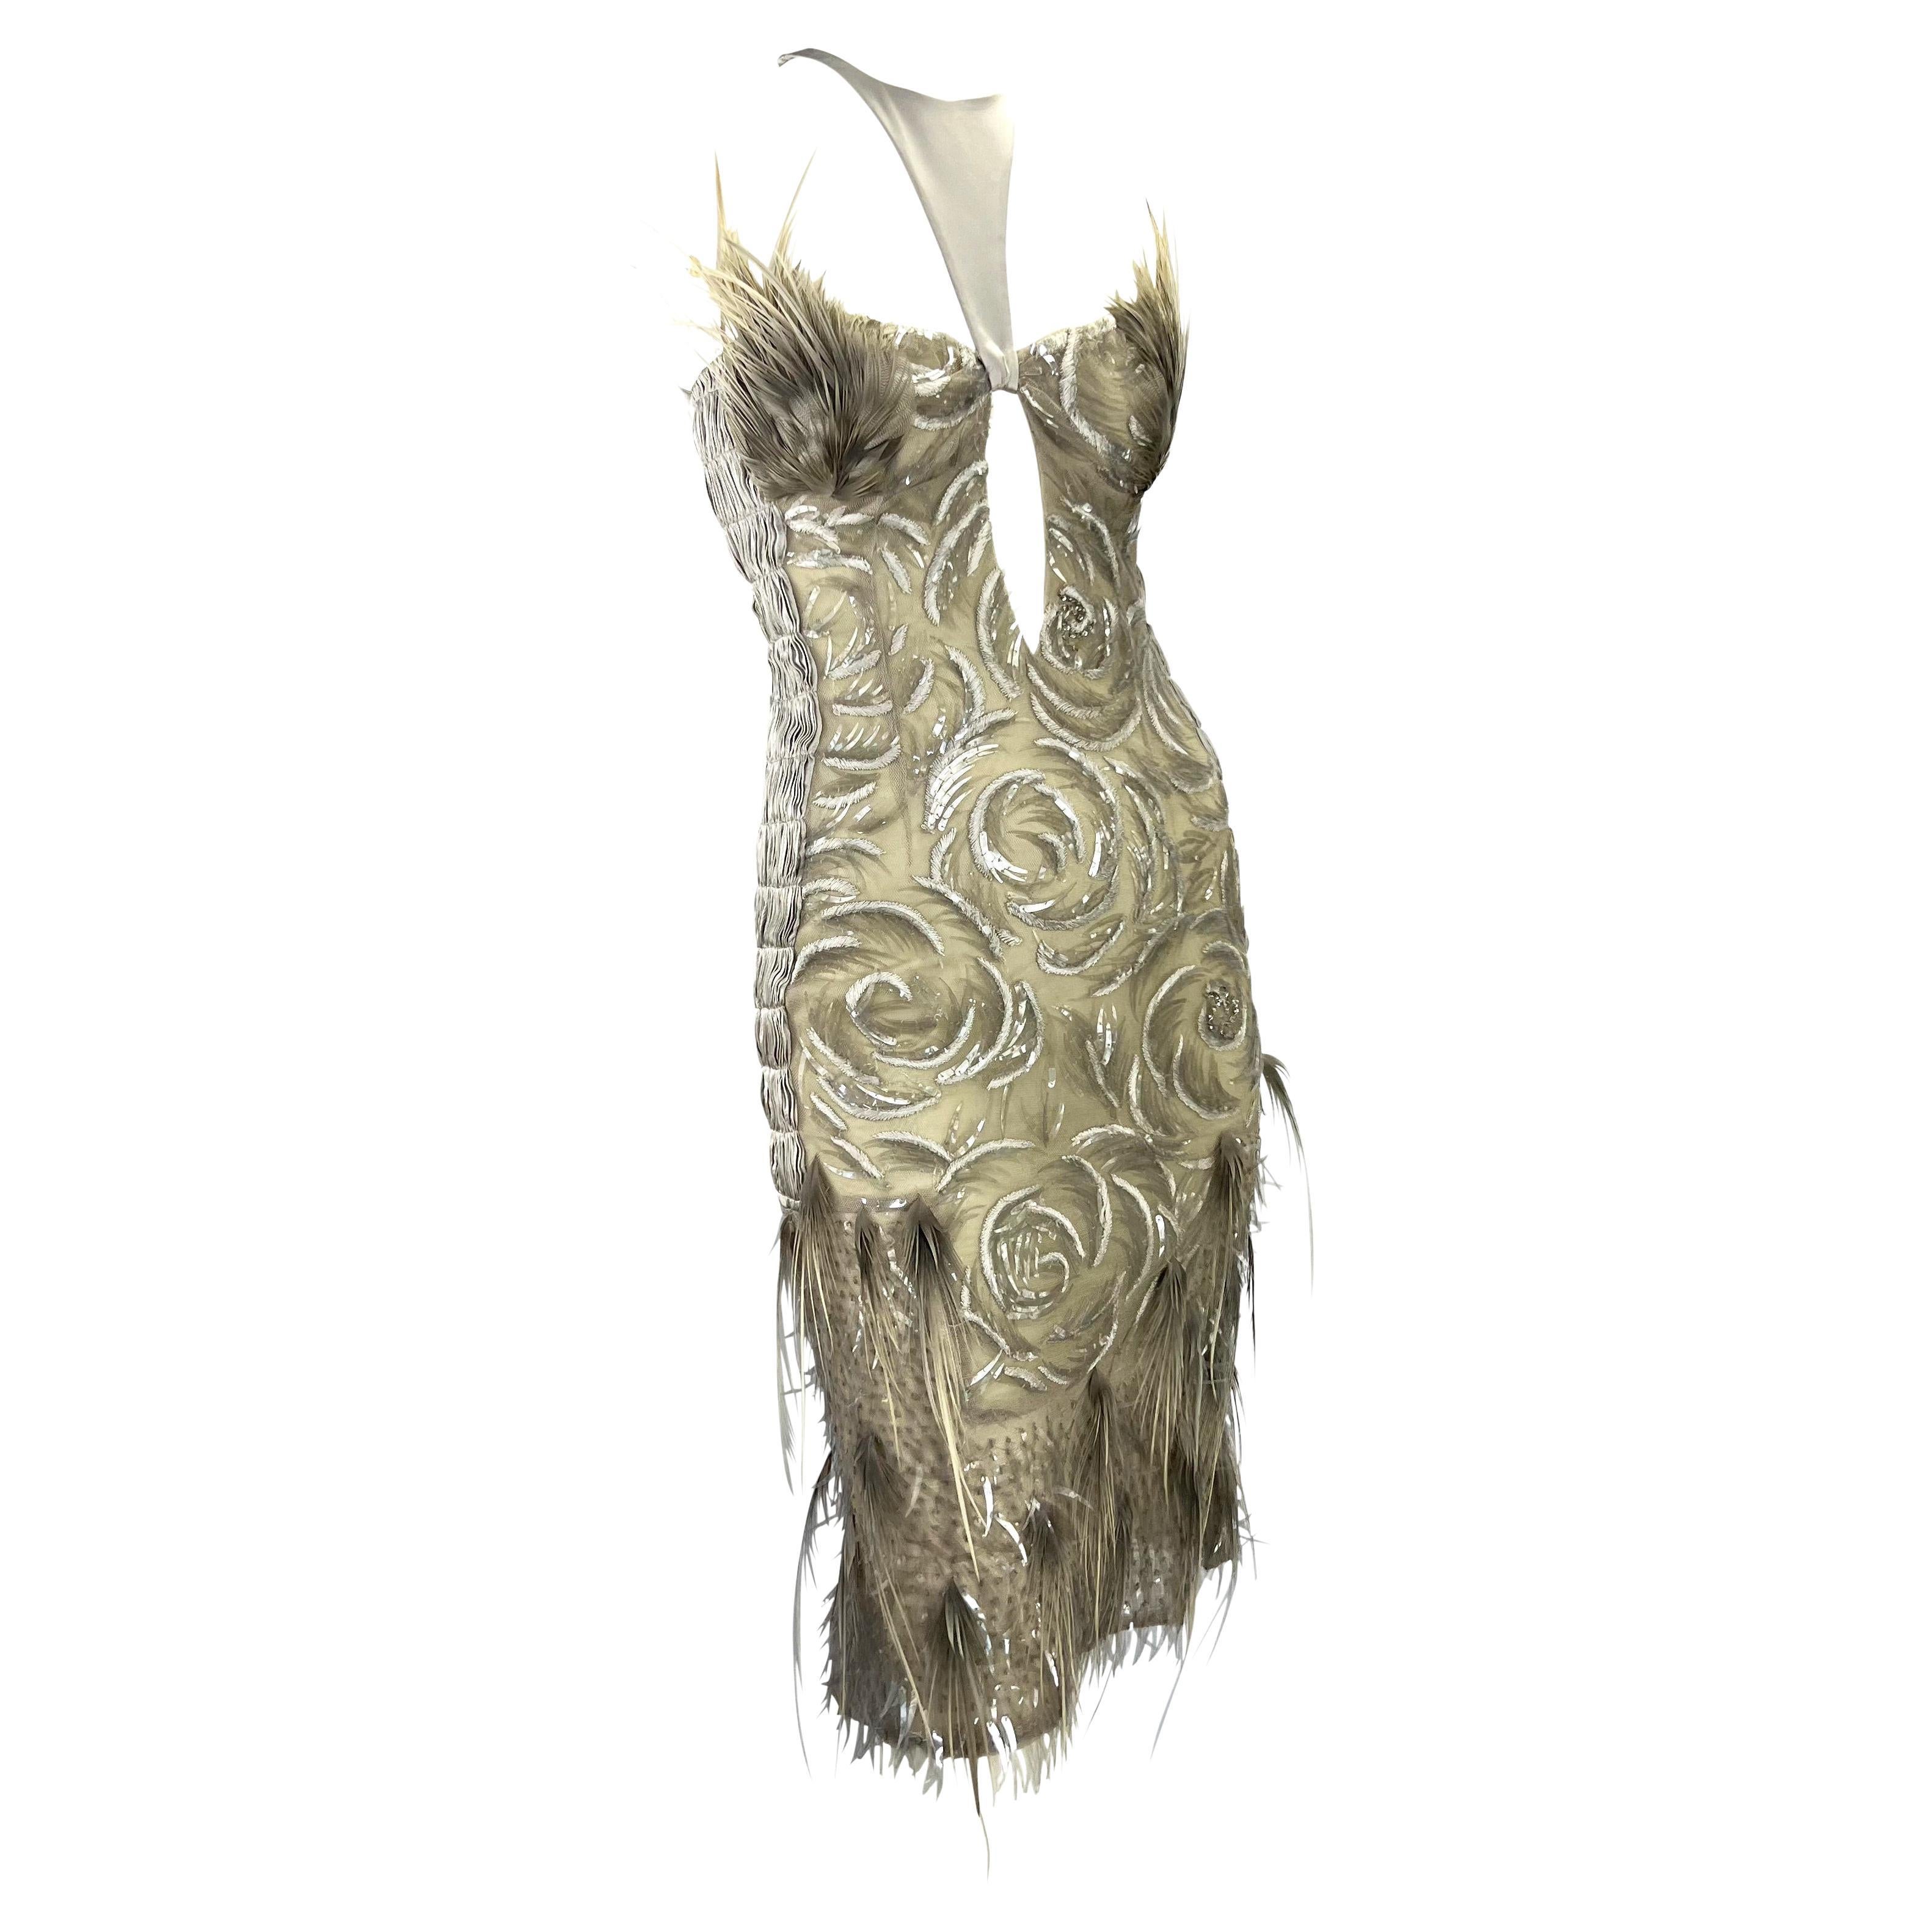 S/S 2004 Gucci by Tom Ford Feather Rhinestone Silver Silk Backless Dress 1